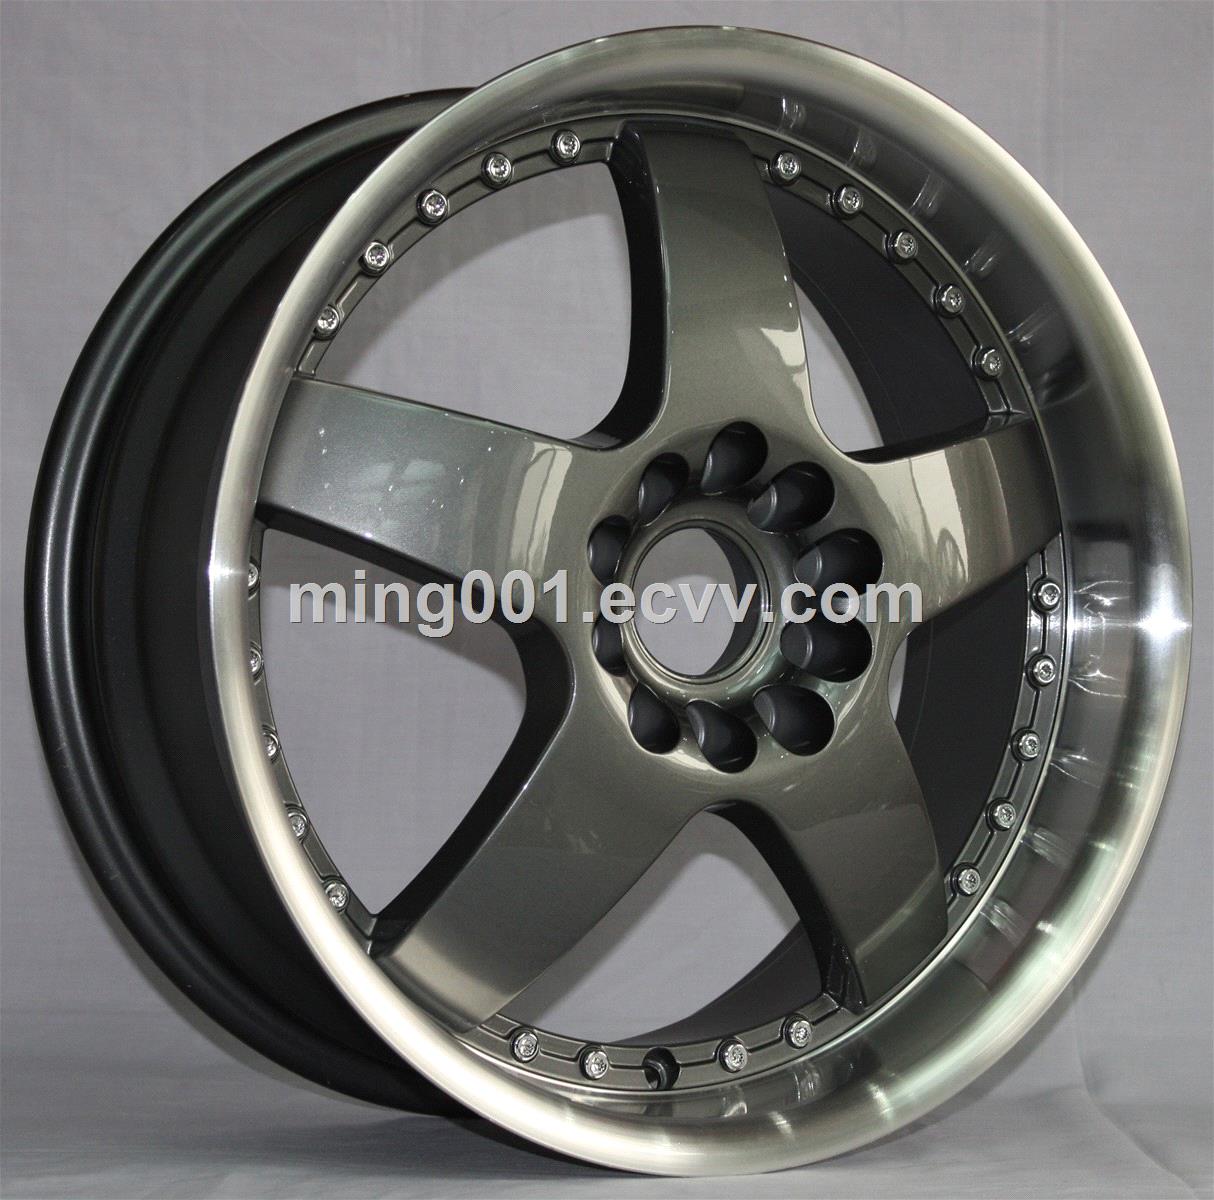 5X1143 mm Made in China Quality Assured And Silver Black or As your request Car Alloy Wheel